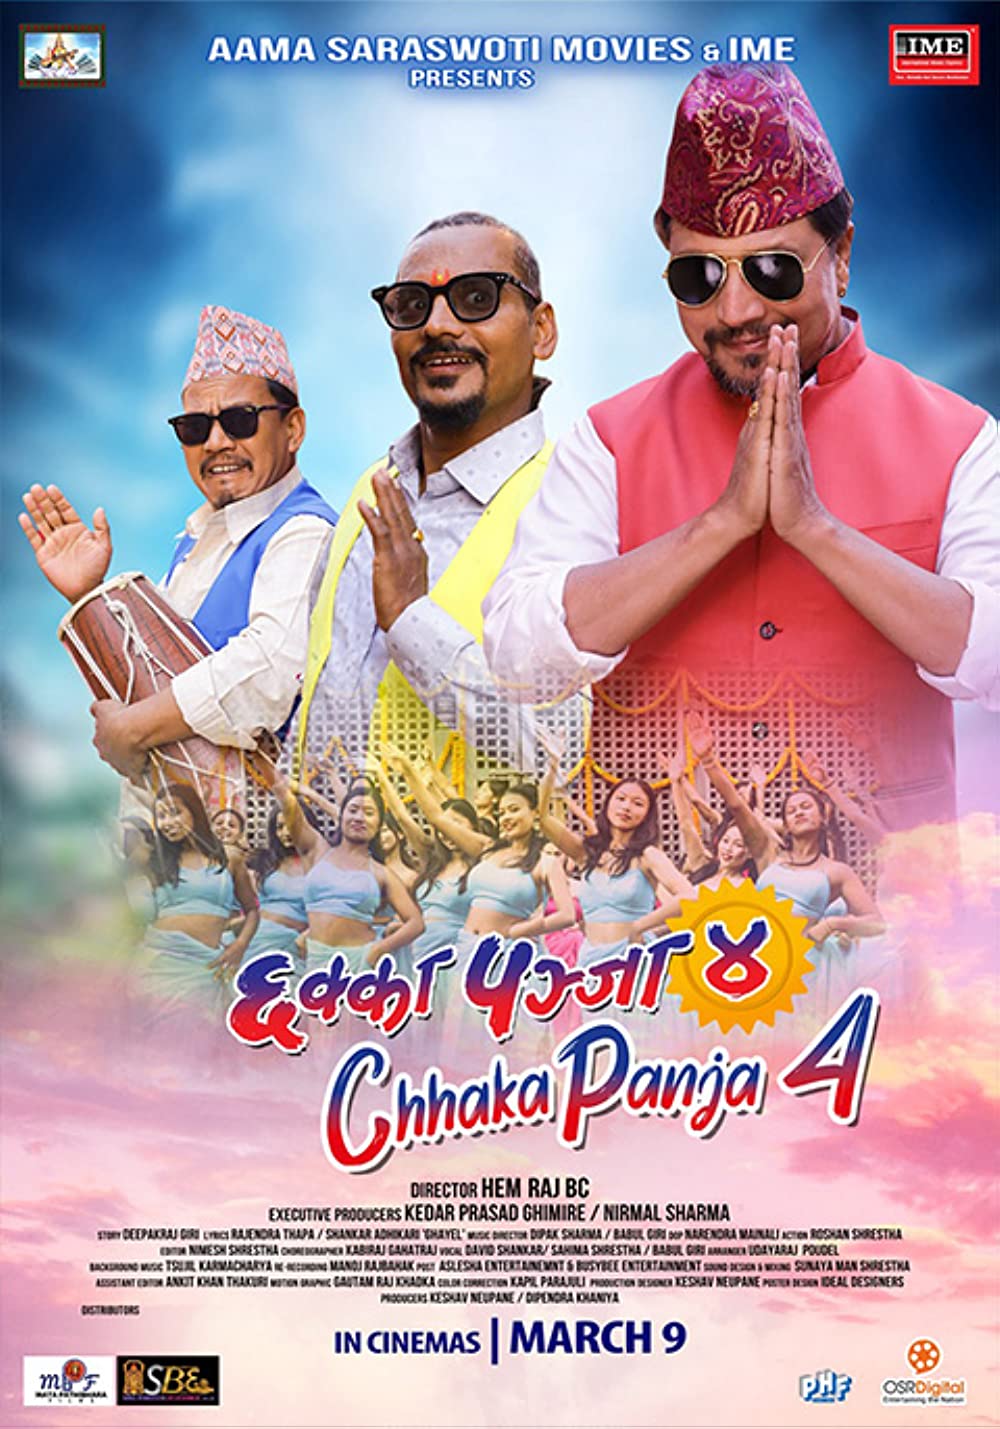 For the first time in Iraq, a Nepali film, 'Chakkapanja 4' will be shown on May 12 1